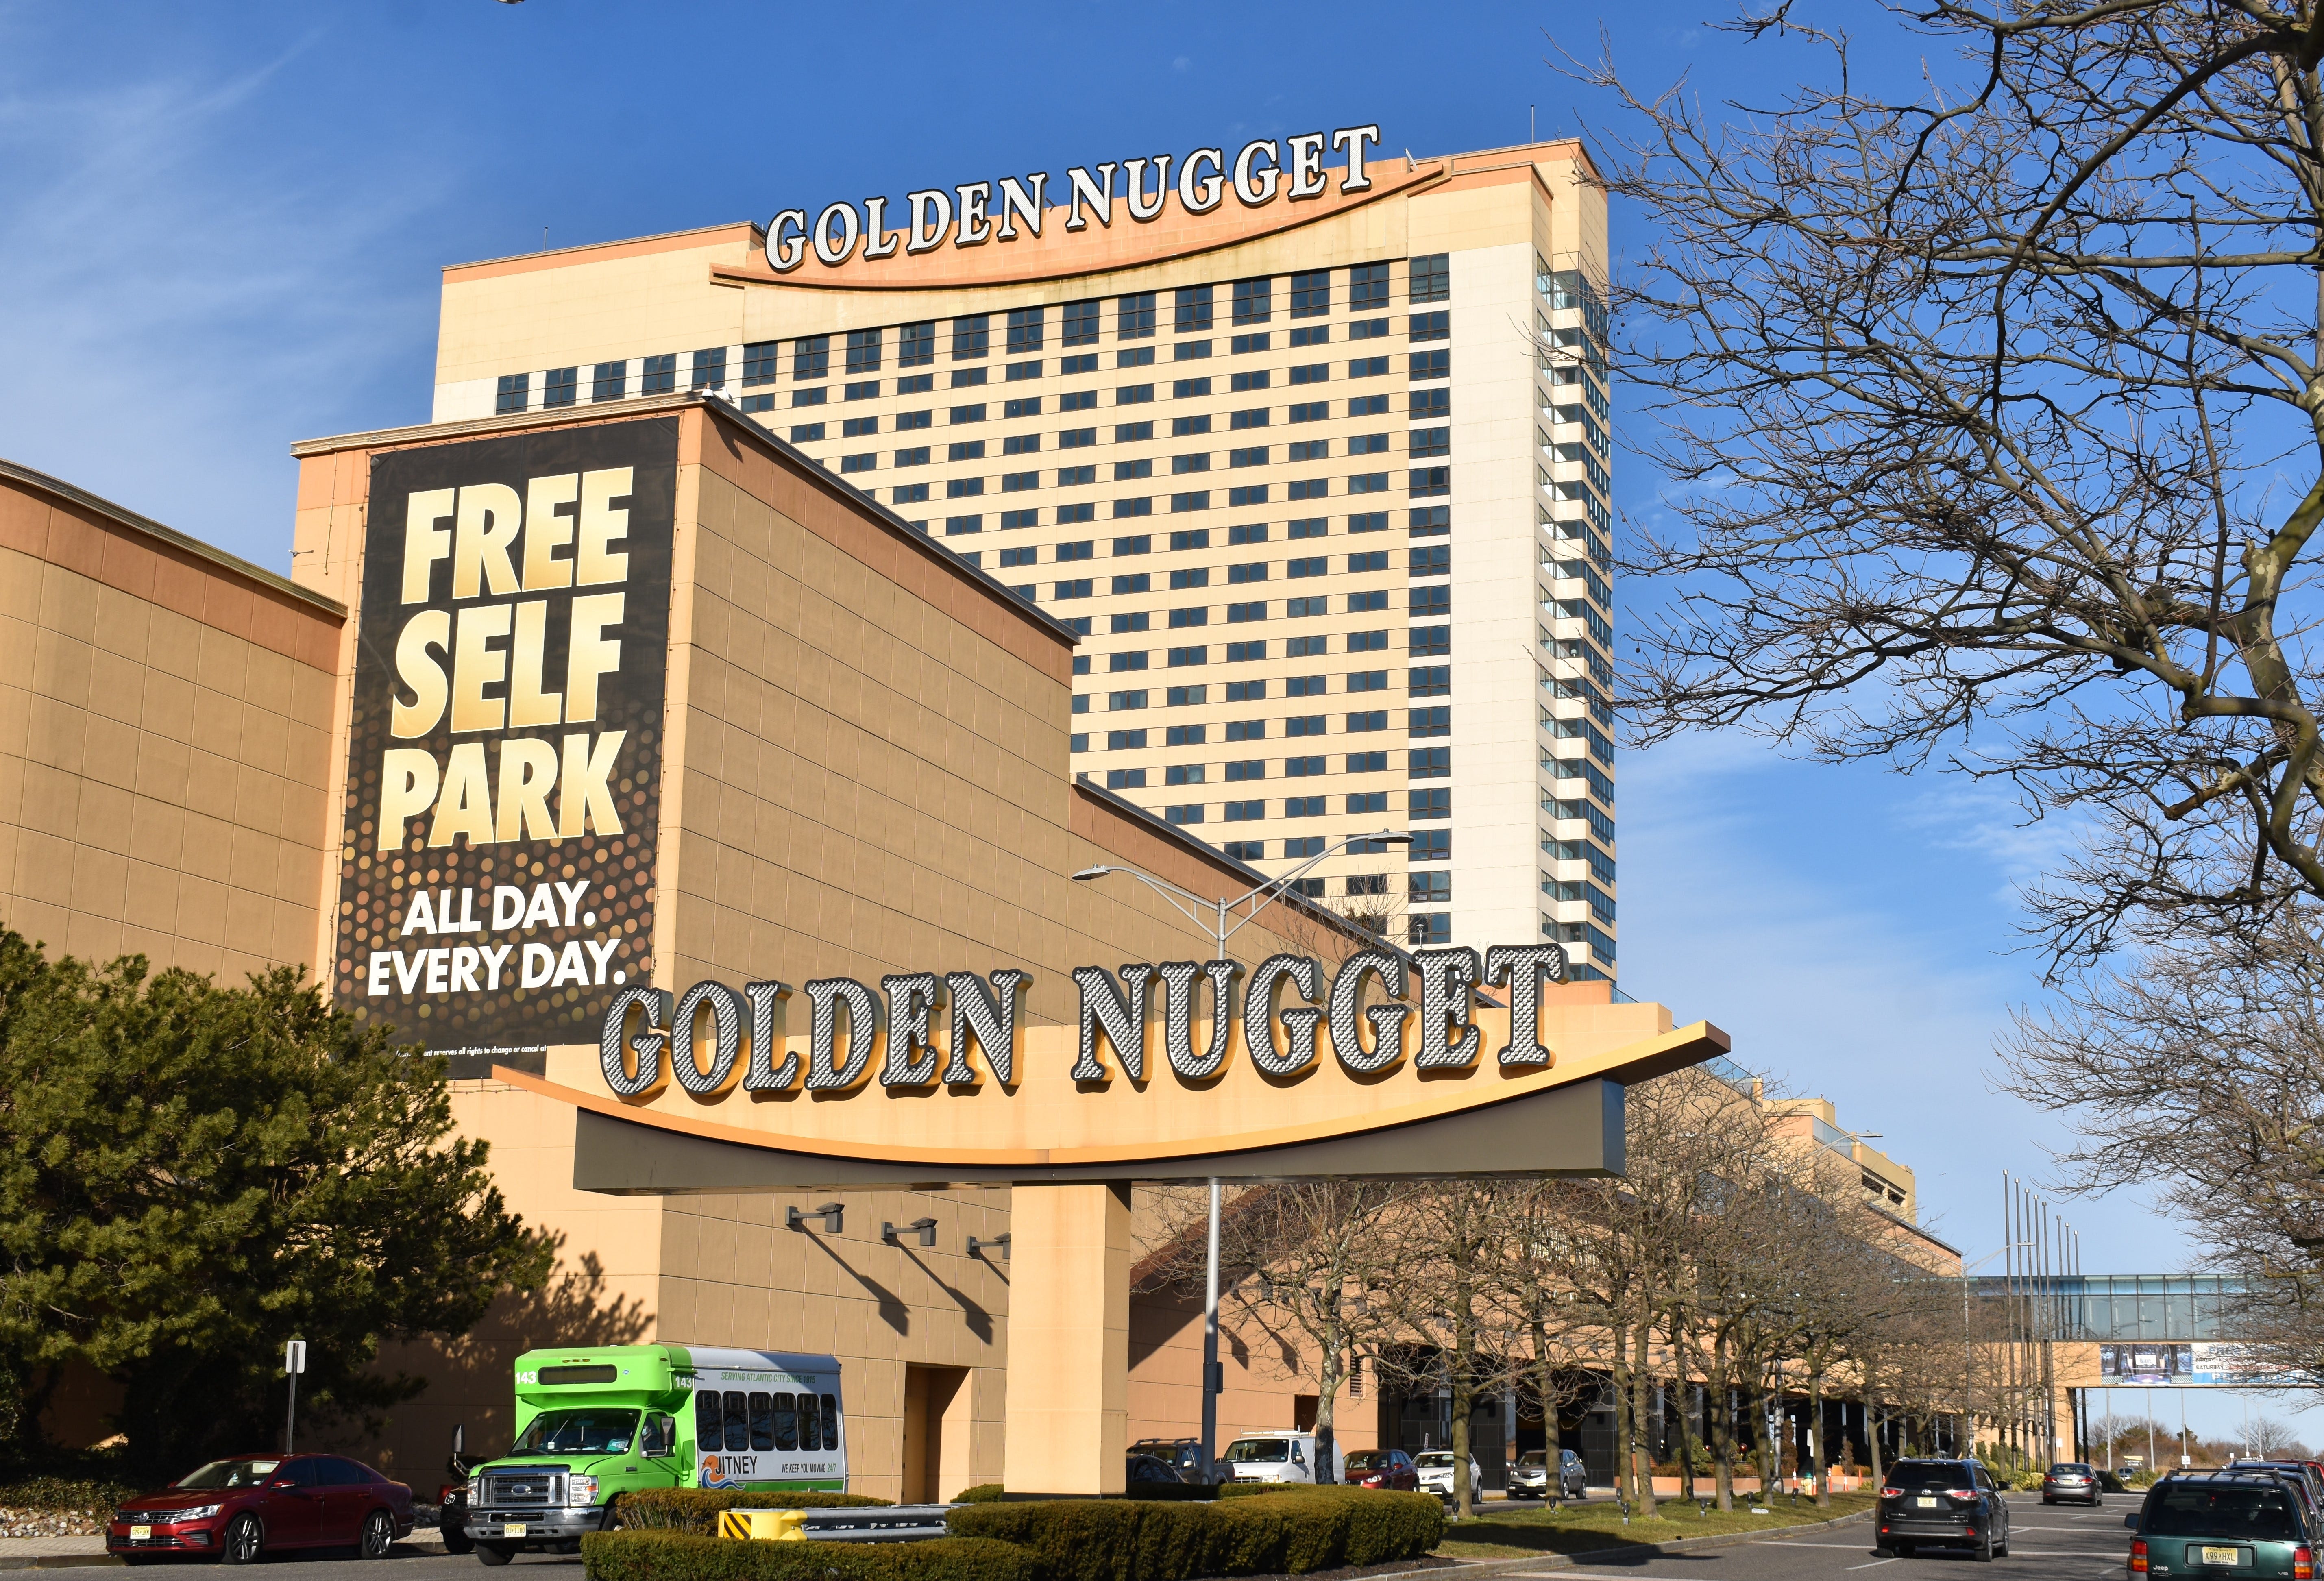 The former Trump Marina in Atlantic City is now the Golden Nugget.